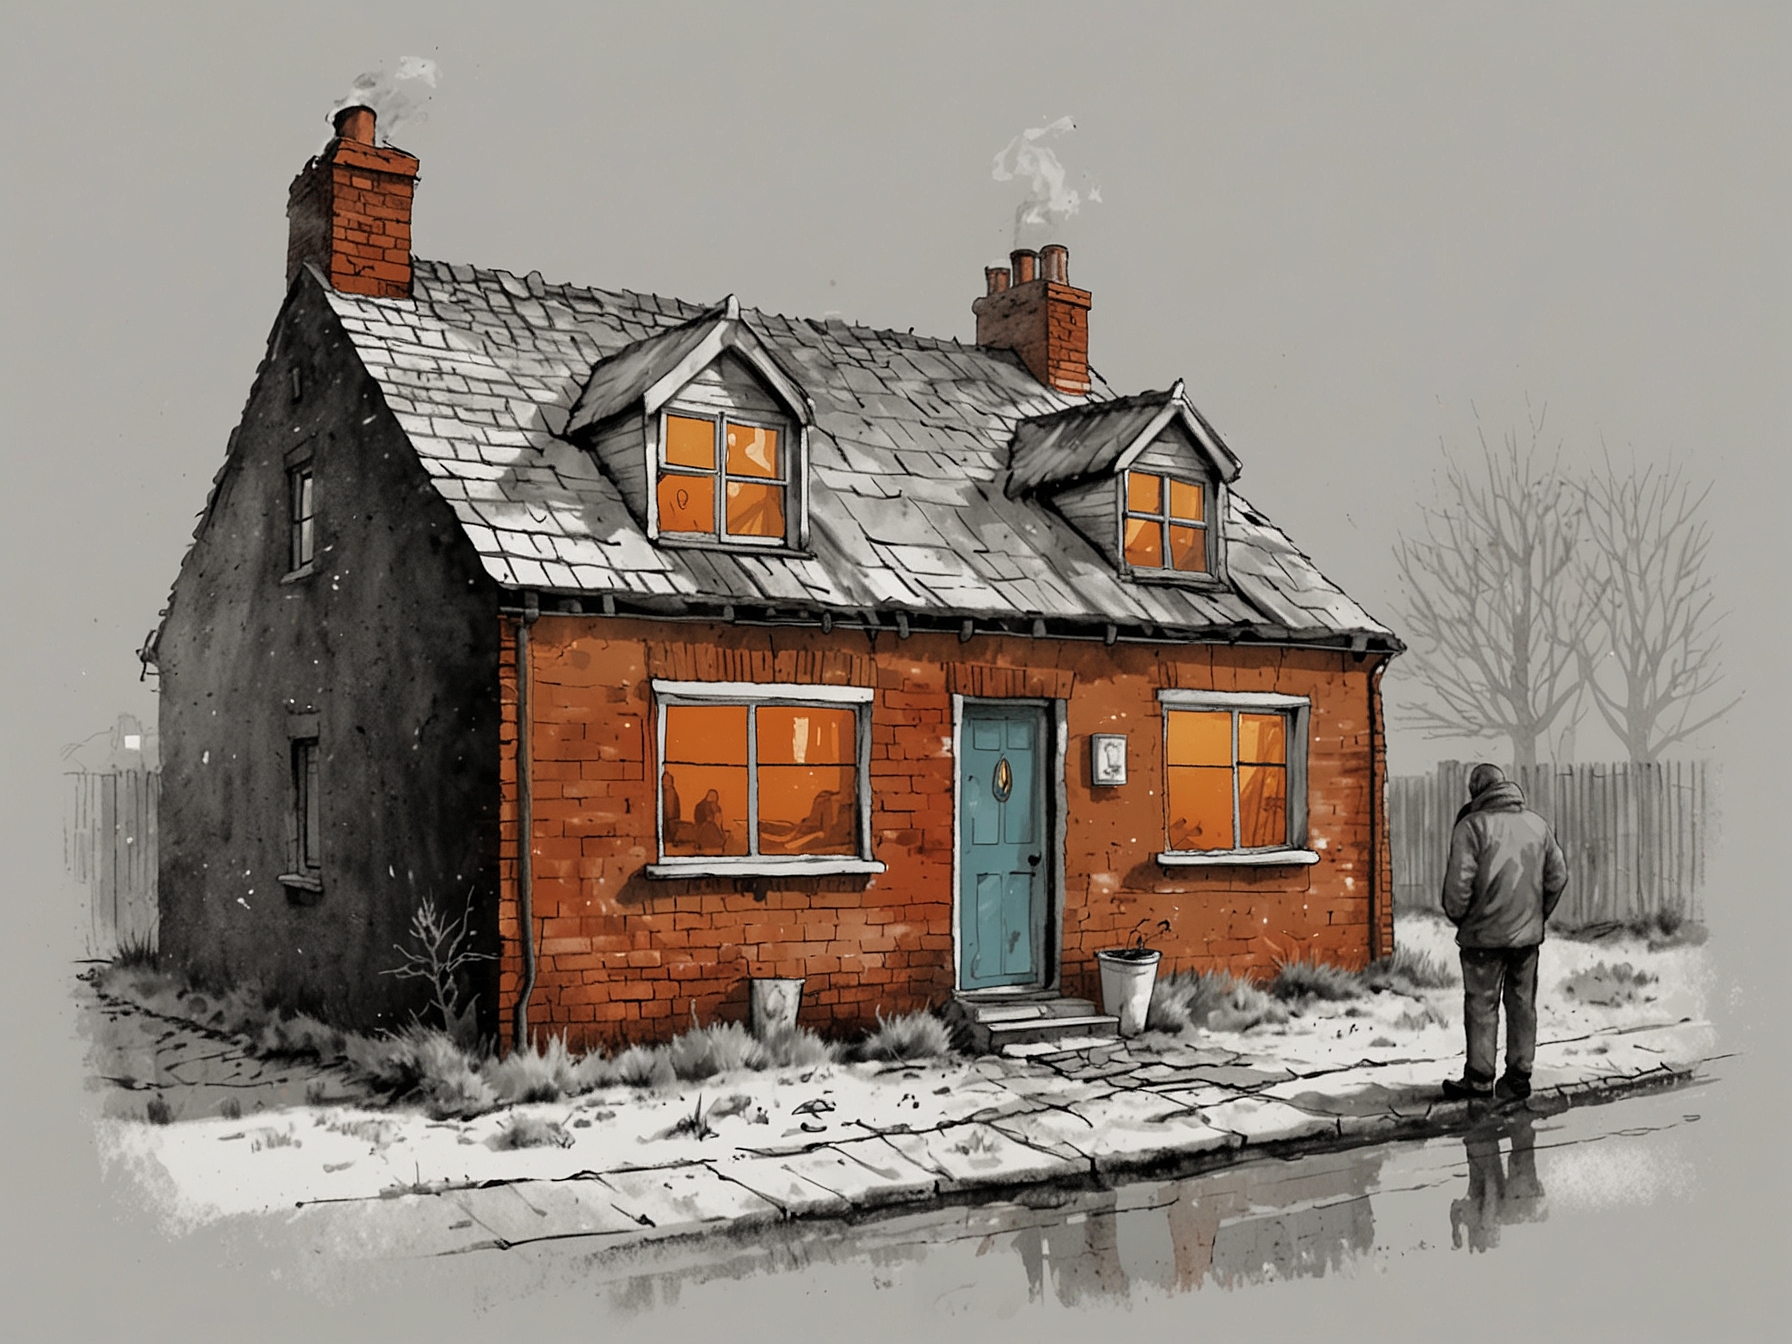 A poorly insulated UK home with a tenant struggling to keep warm, illustrating the real-life impact of fuel poverty that Labour's new initiatives aim to address.